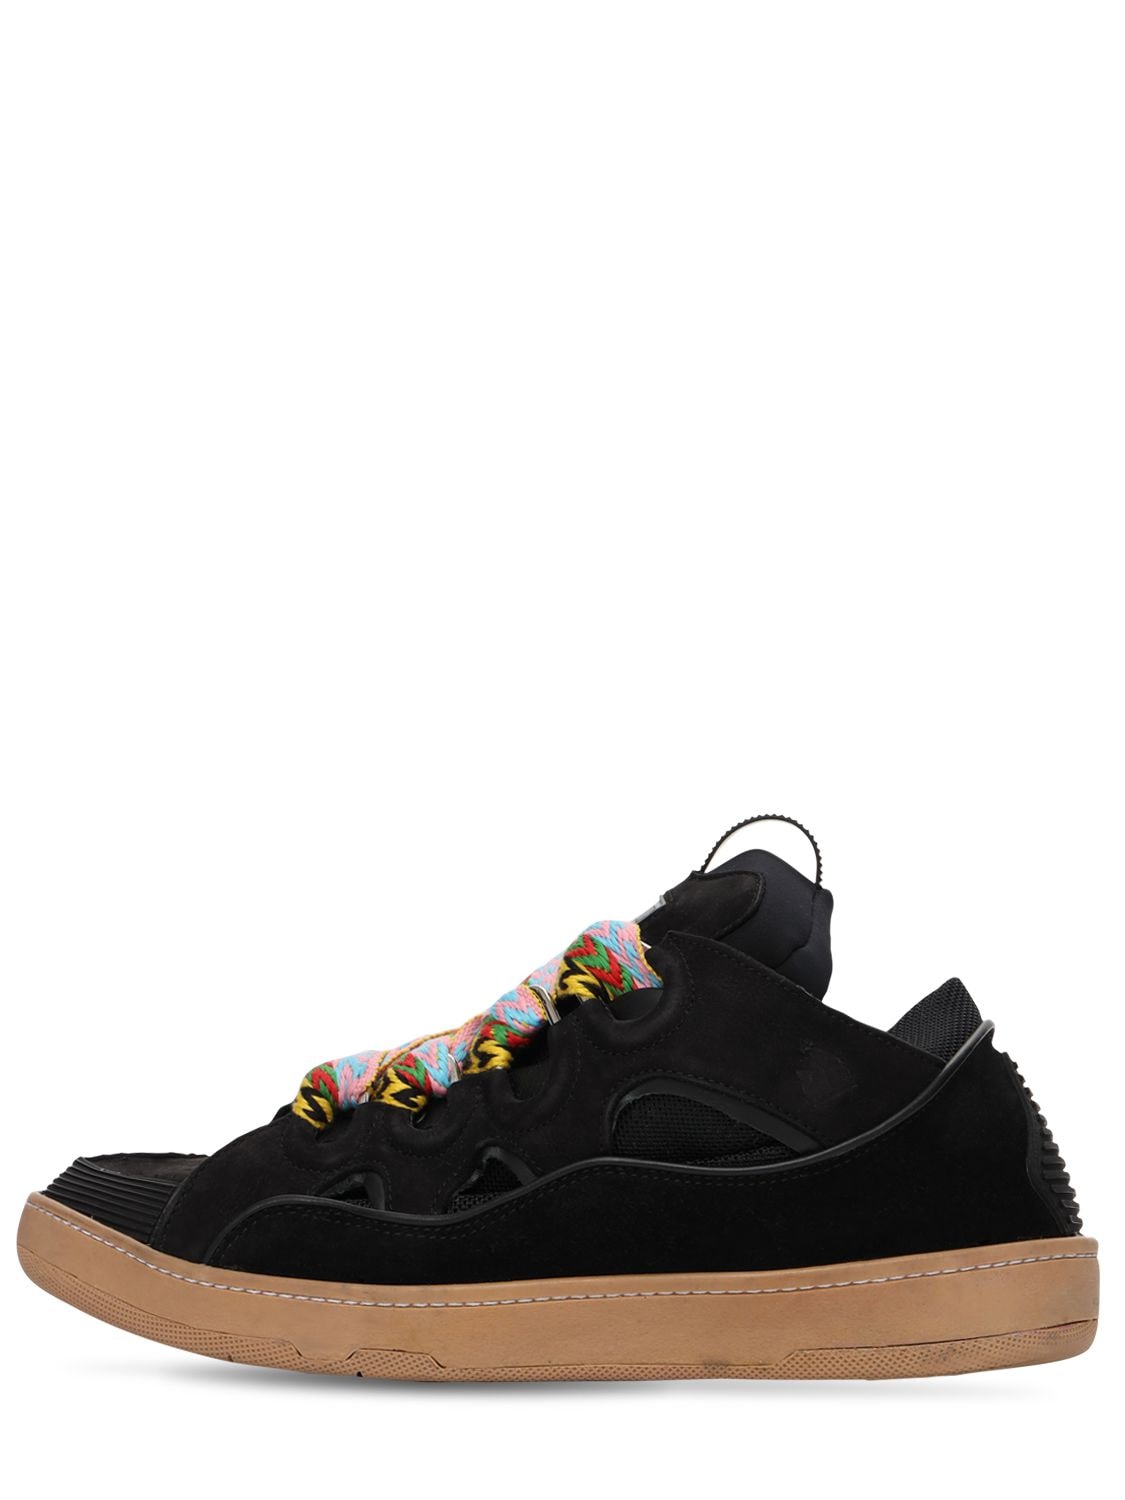 Lanvin Curb Leather Sneakers In Black | ModeSens